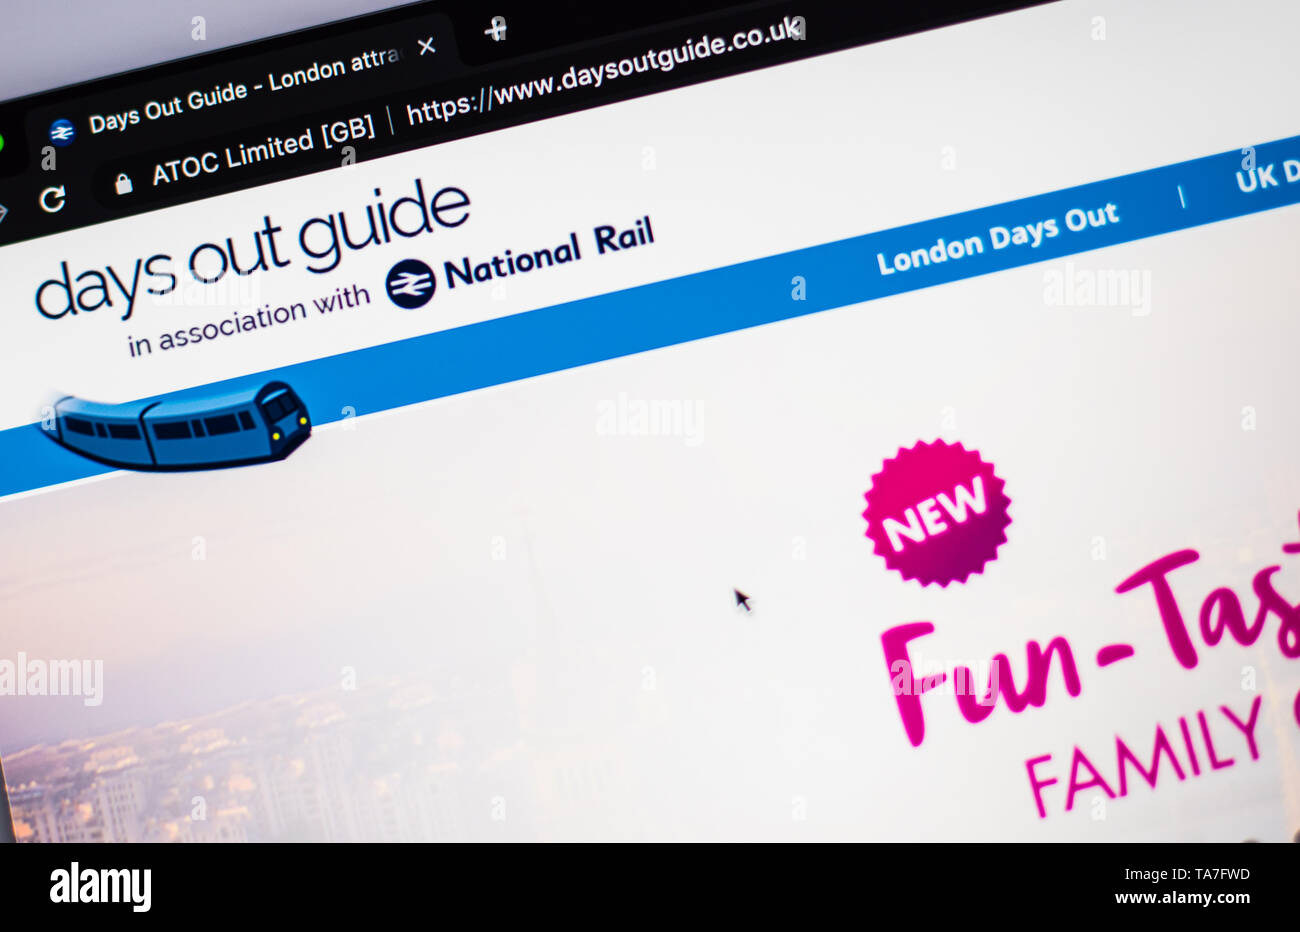 Days out guide webpage Stock Photo